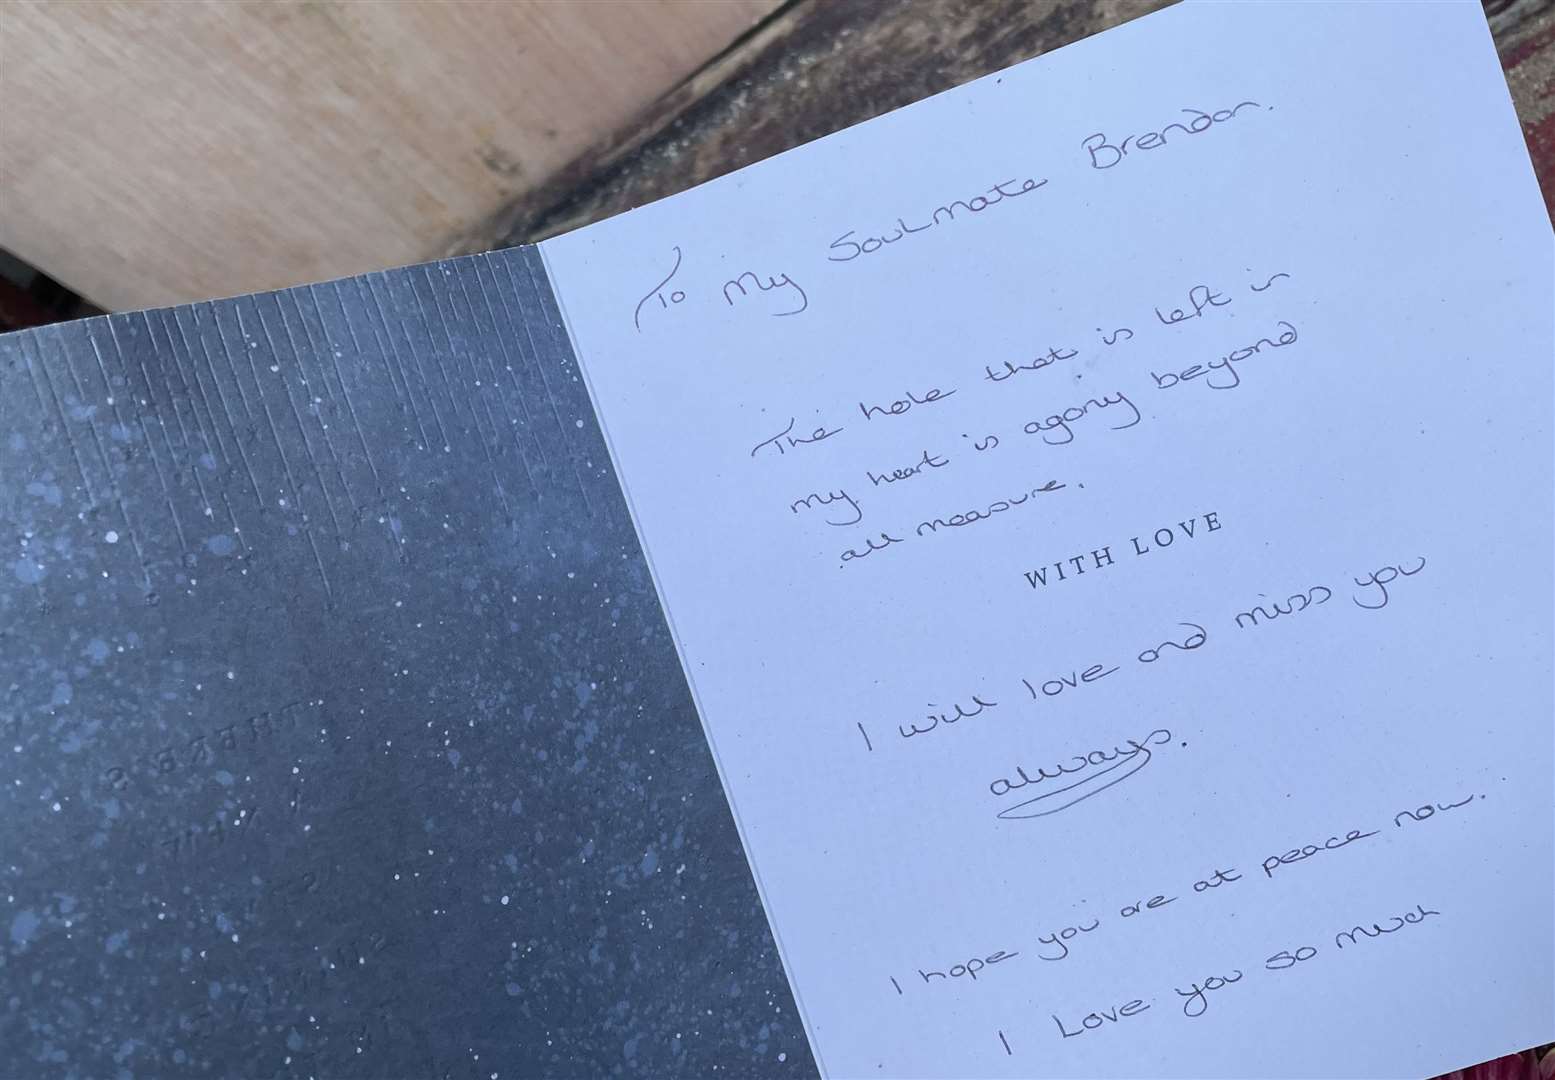 A handwritten card at the site of the crash